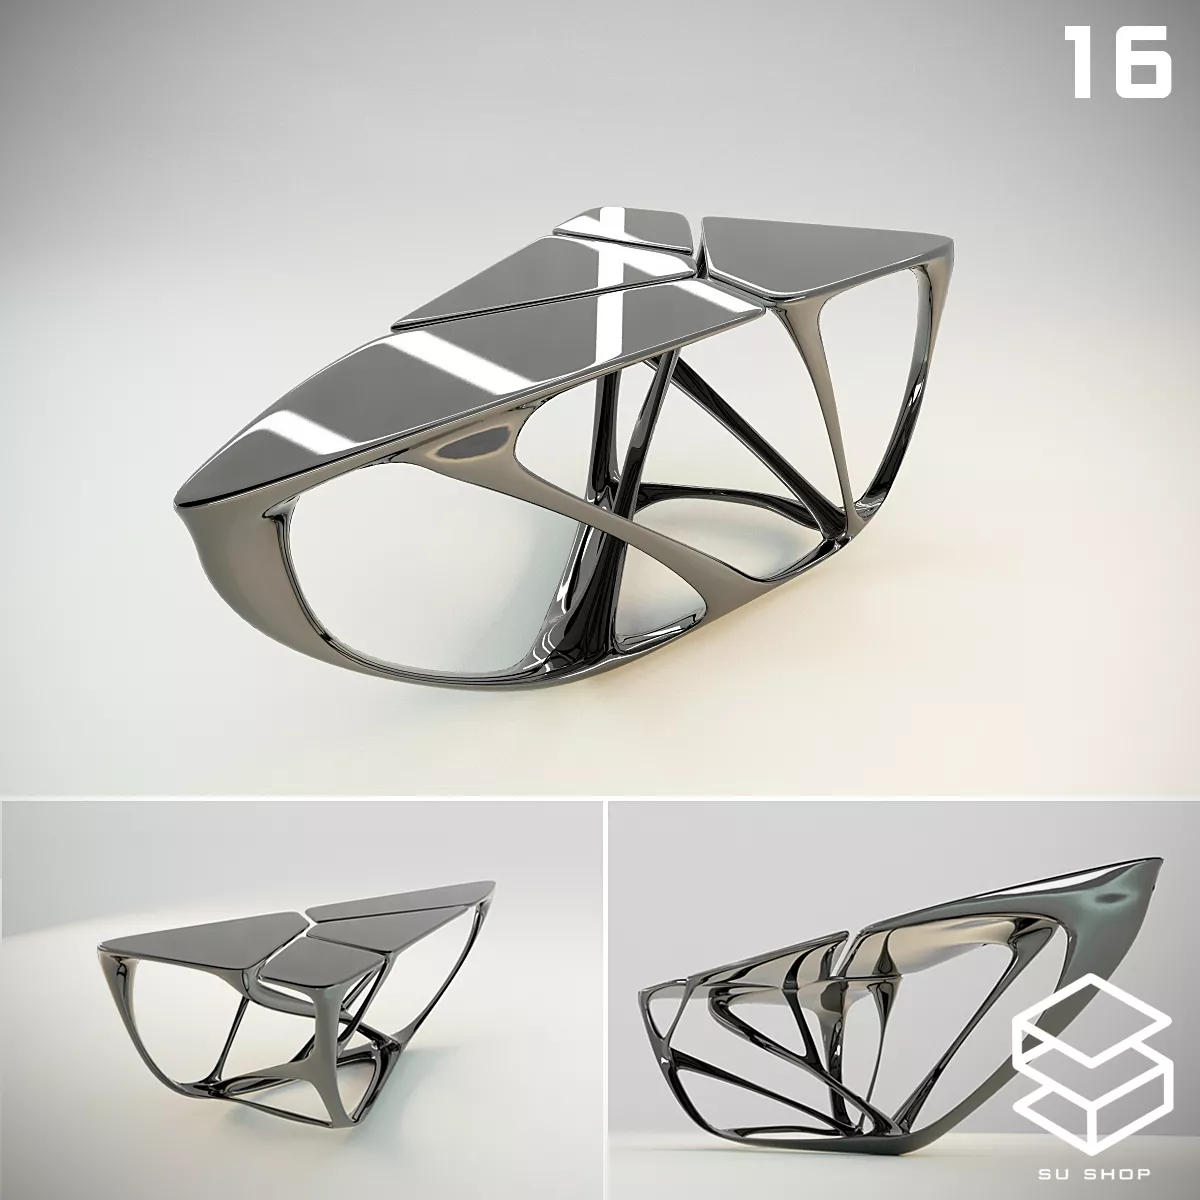 MODERN TEA TABLE - SKETCHUP 3D MODEL - VRAY OR ENSCAPE - ID15023